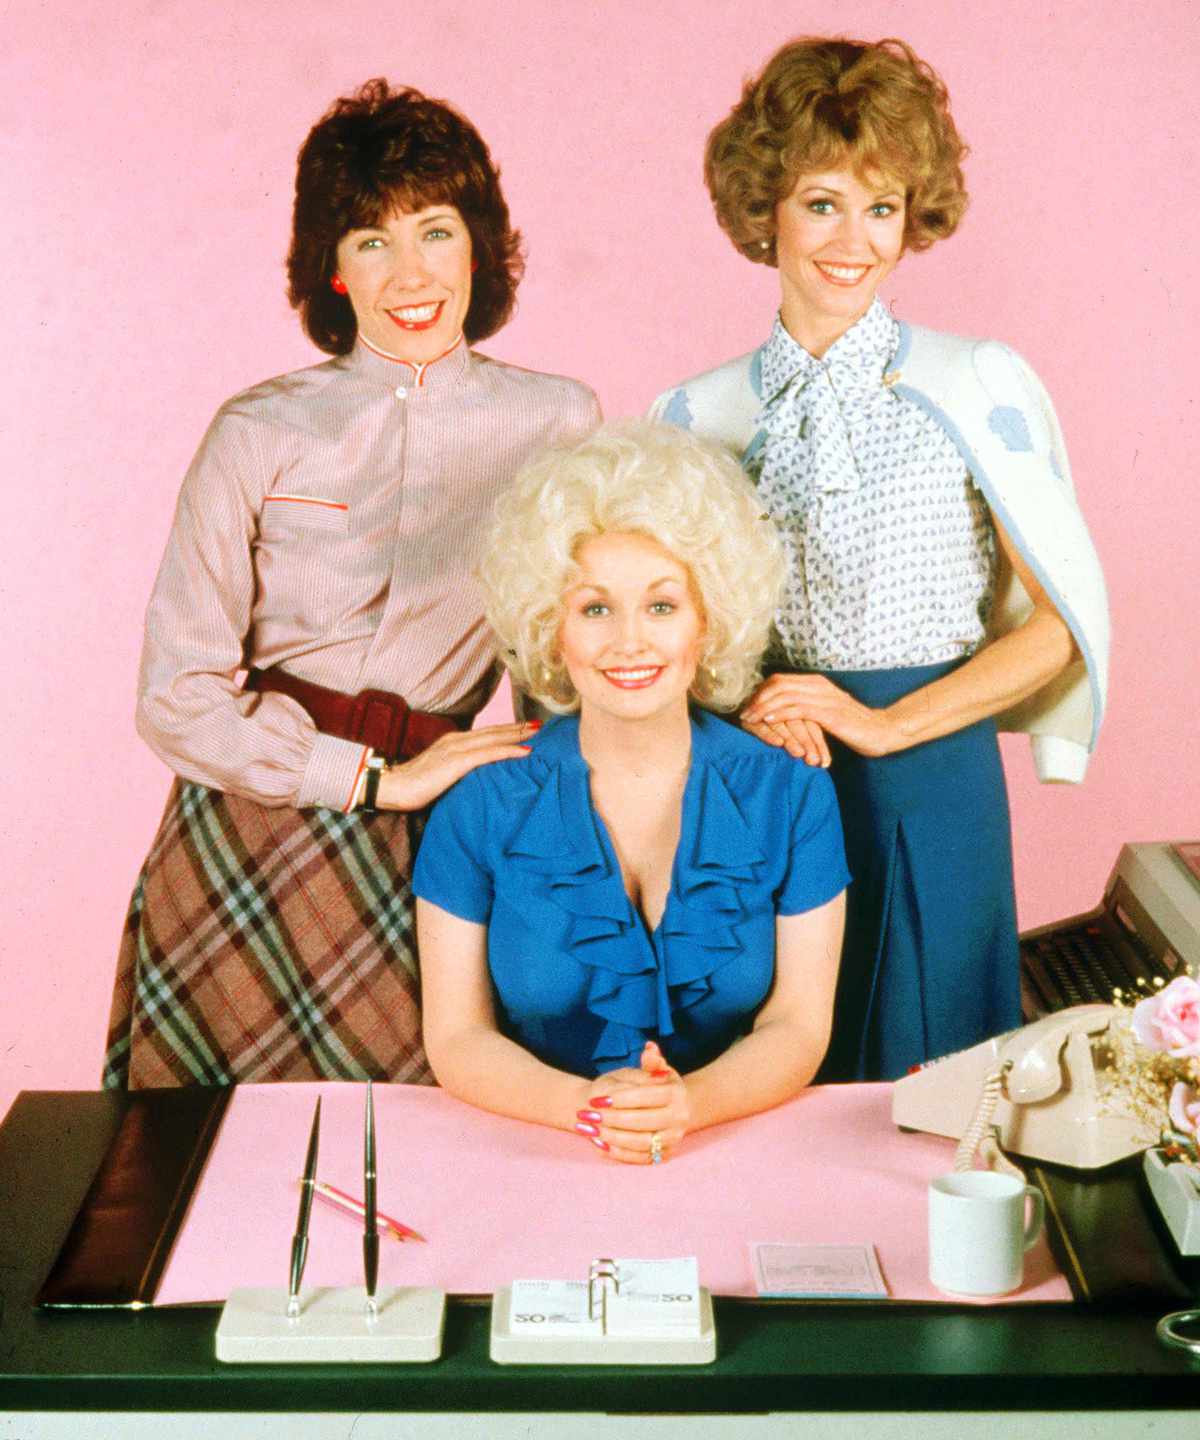 9 to 5 Reunion - LEAD